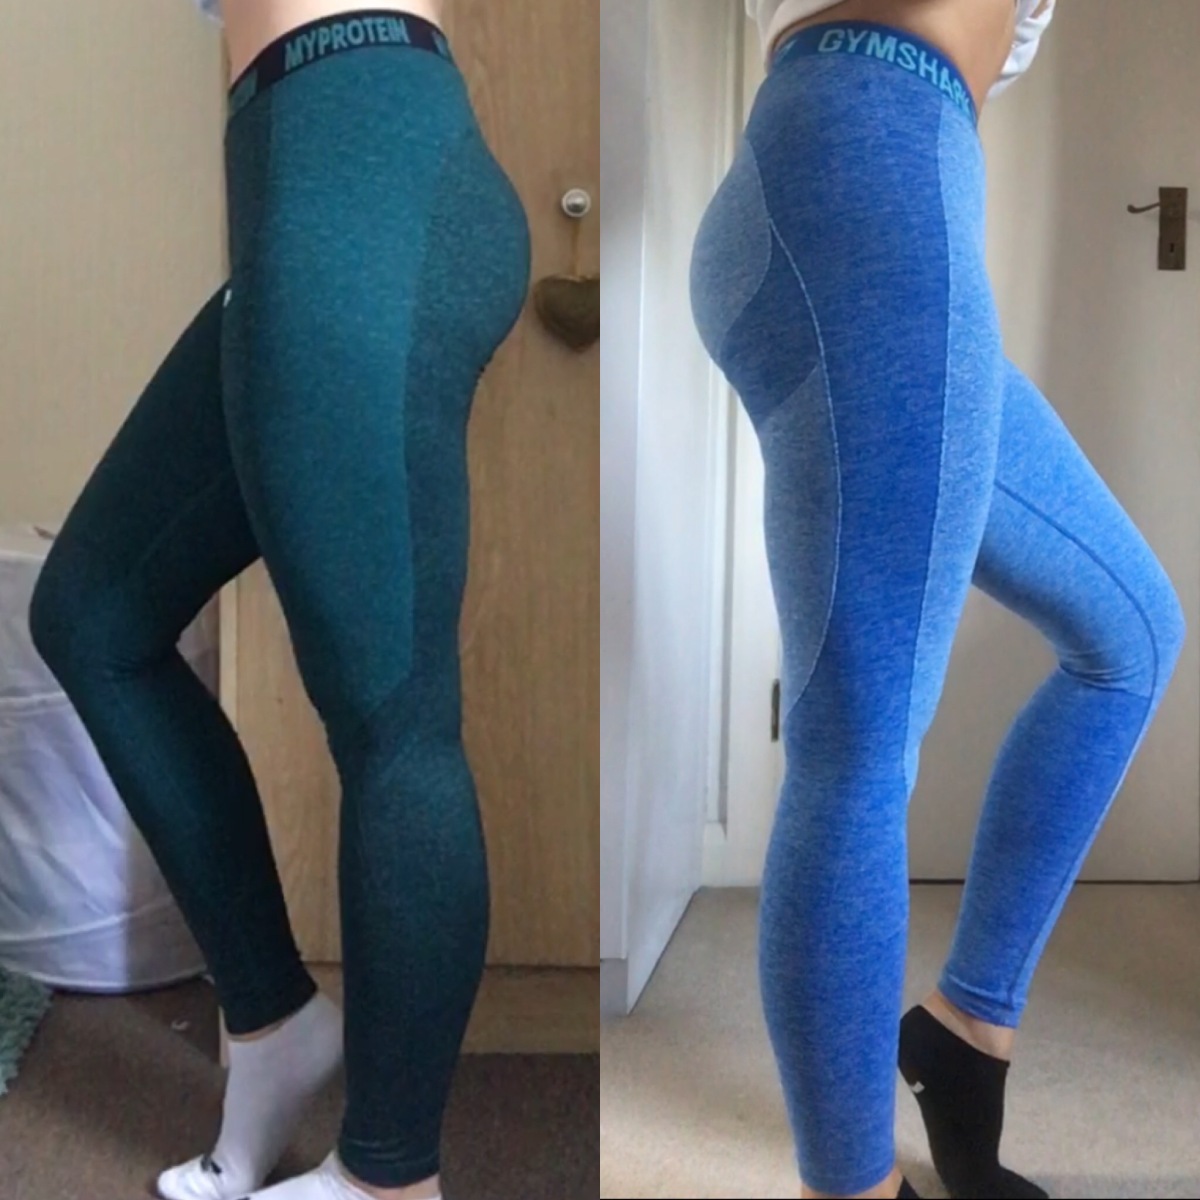 Myprotein Activewear: Leggings Try On and Review 2023 - Student